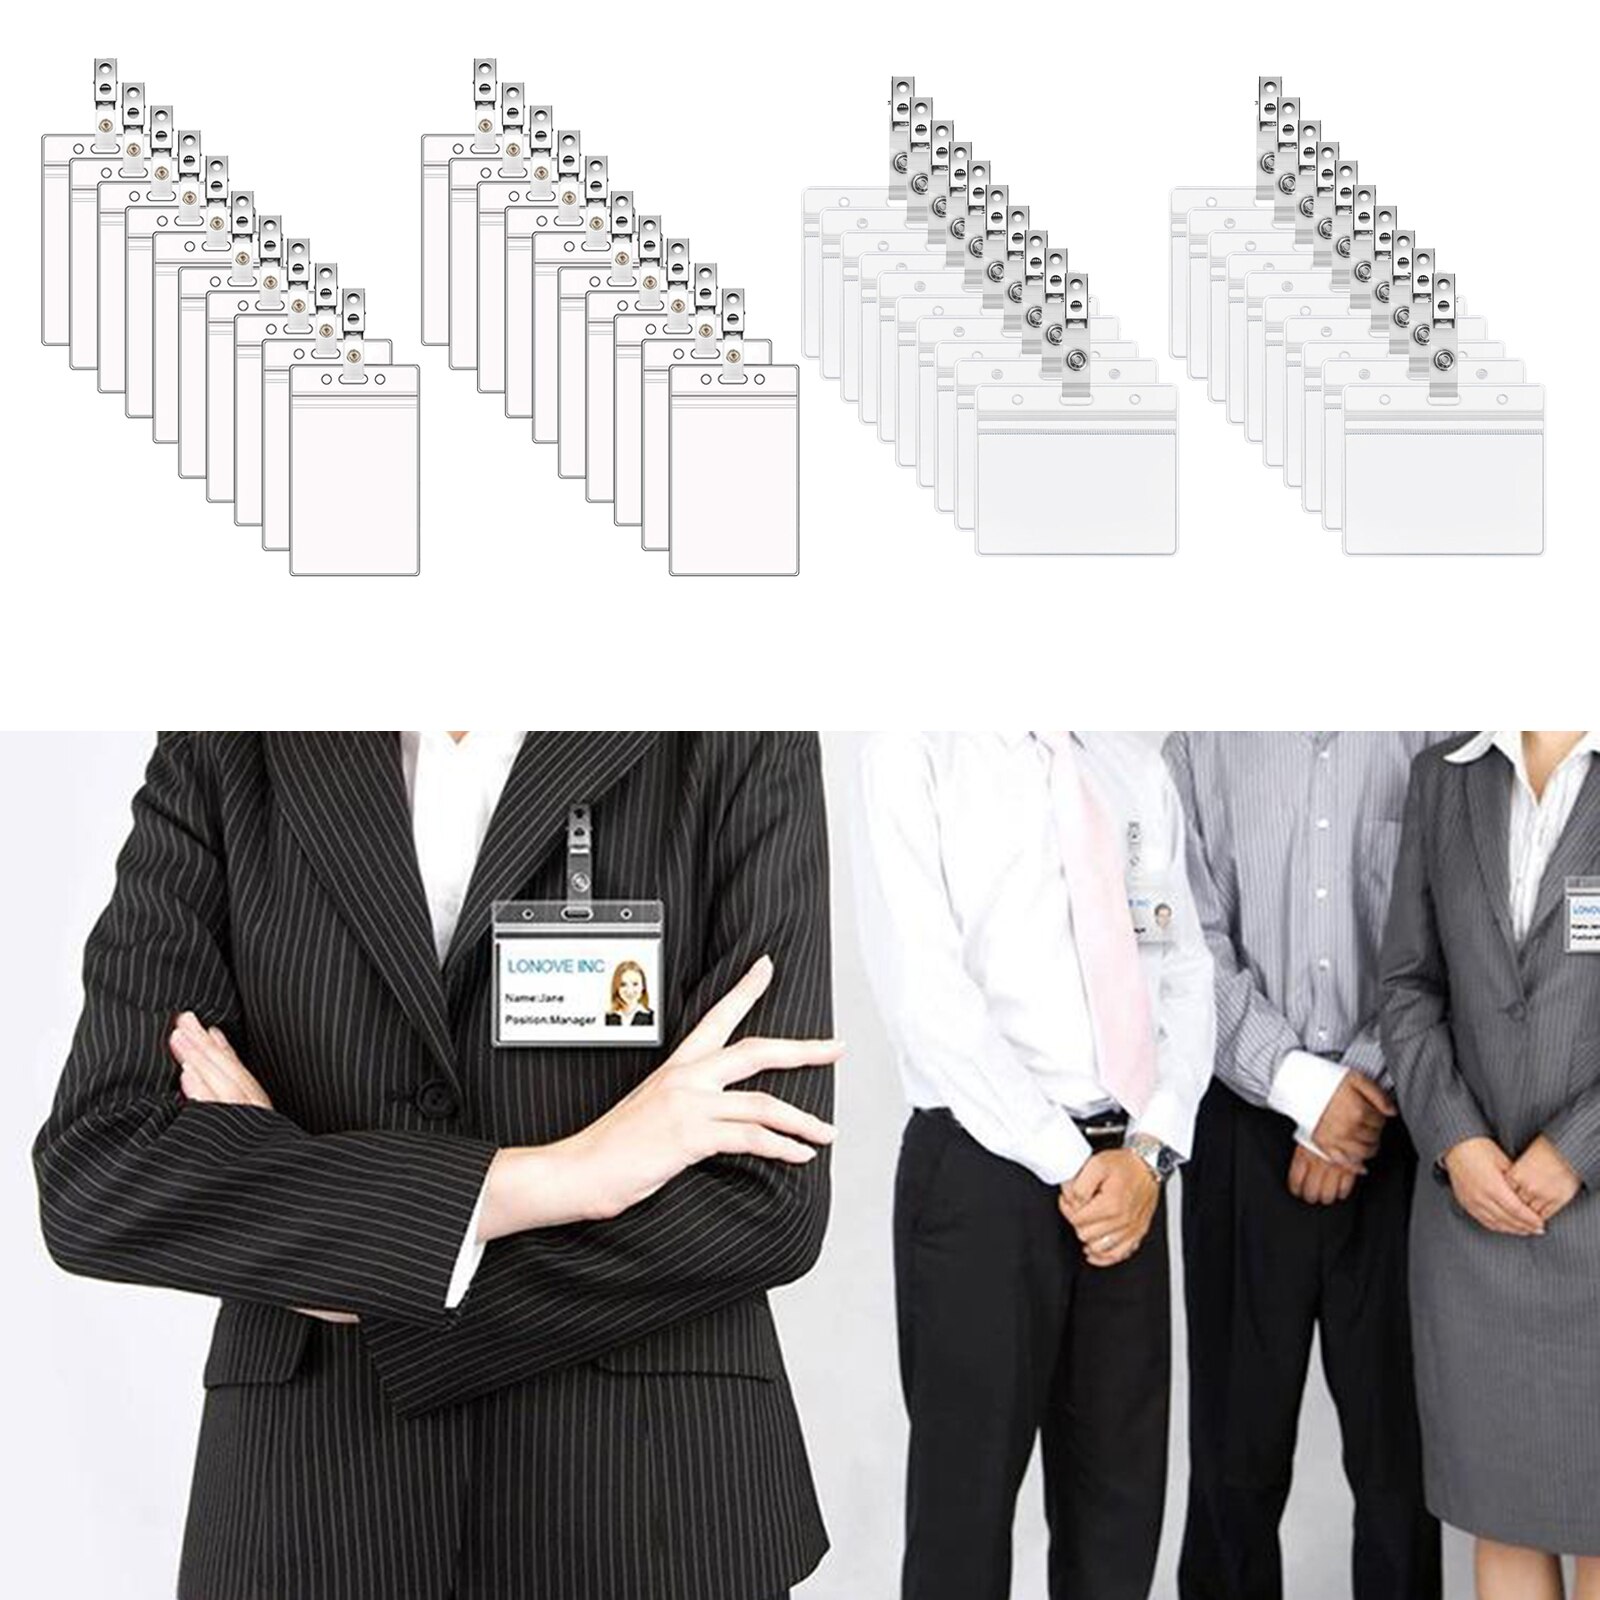 20 Pack Heavy Duty ID Card Name Tag Badge Holder Waterproof Type Resealable Zip Badge with Clips